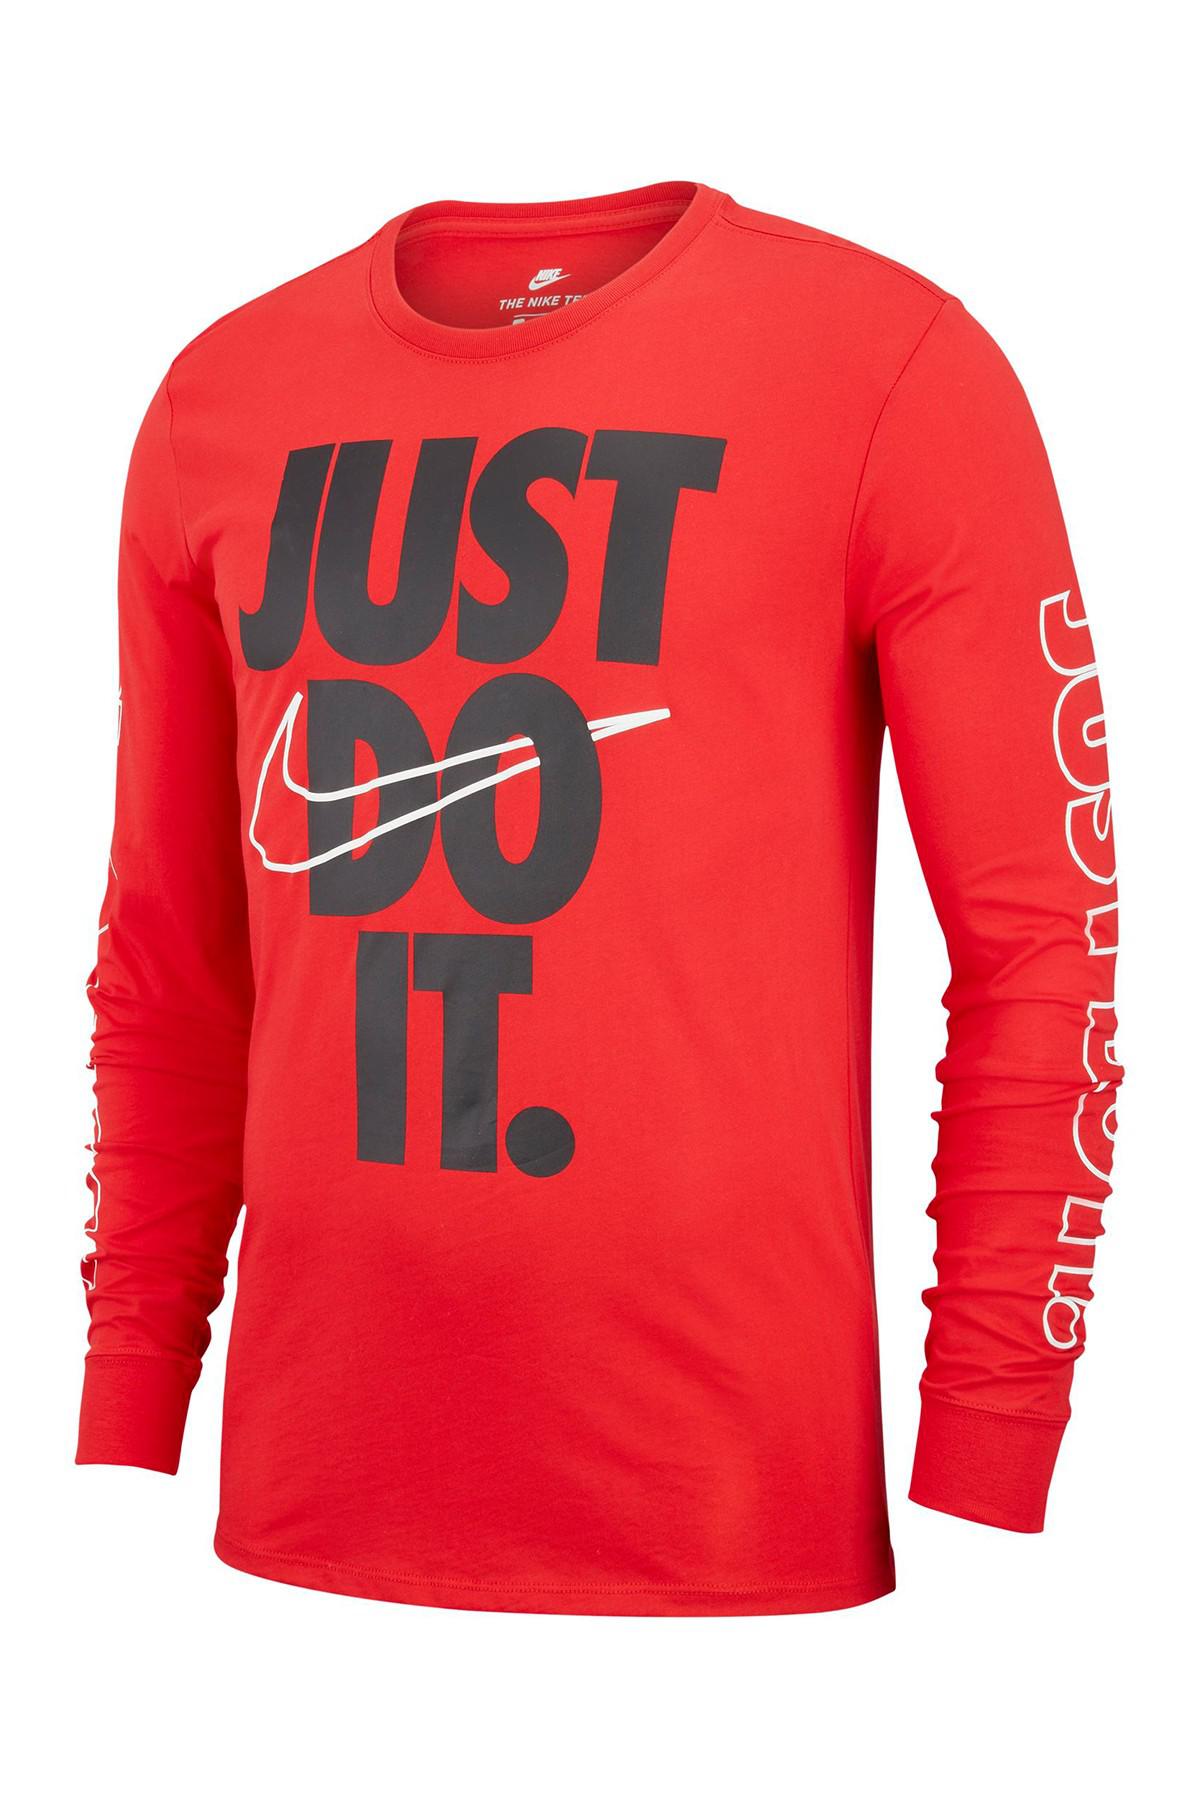 Nike Cotton Just Do It Long Sleeve Tee in University Red/White (Red ...